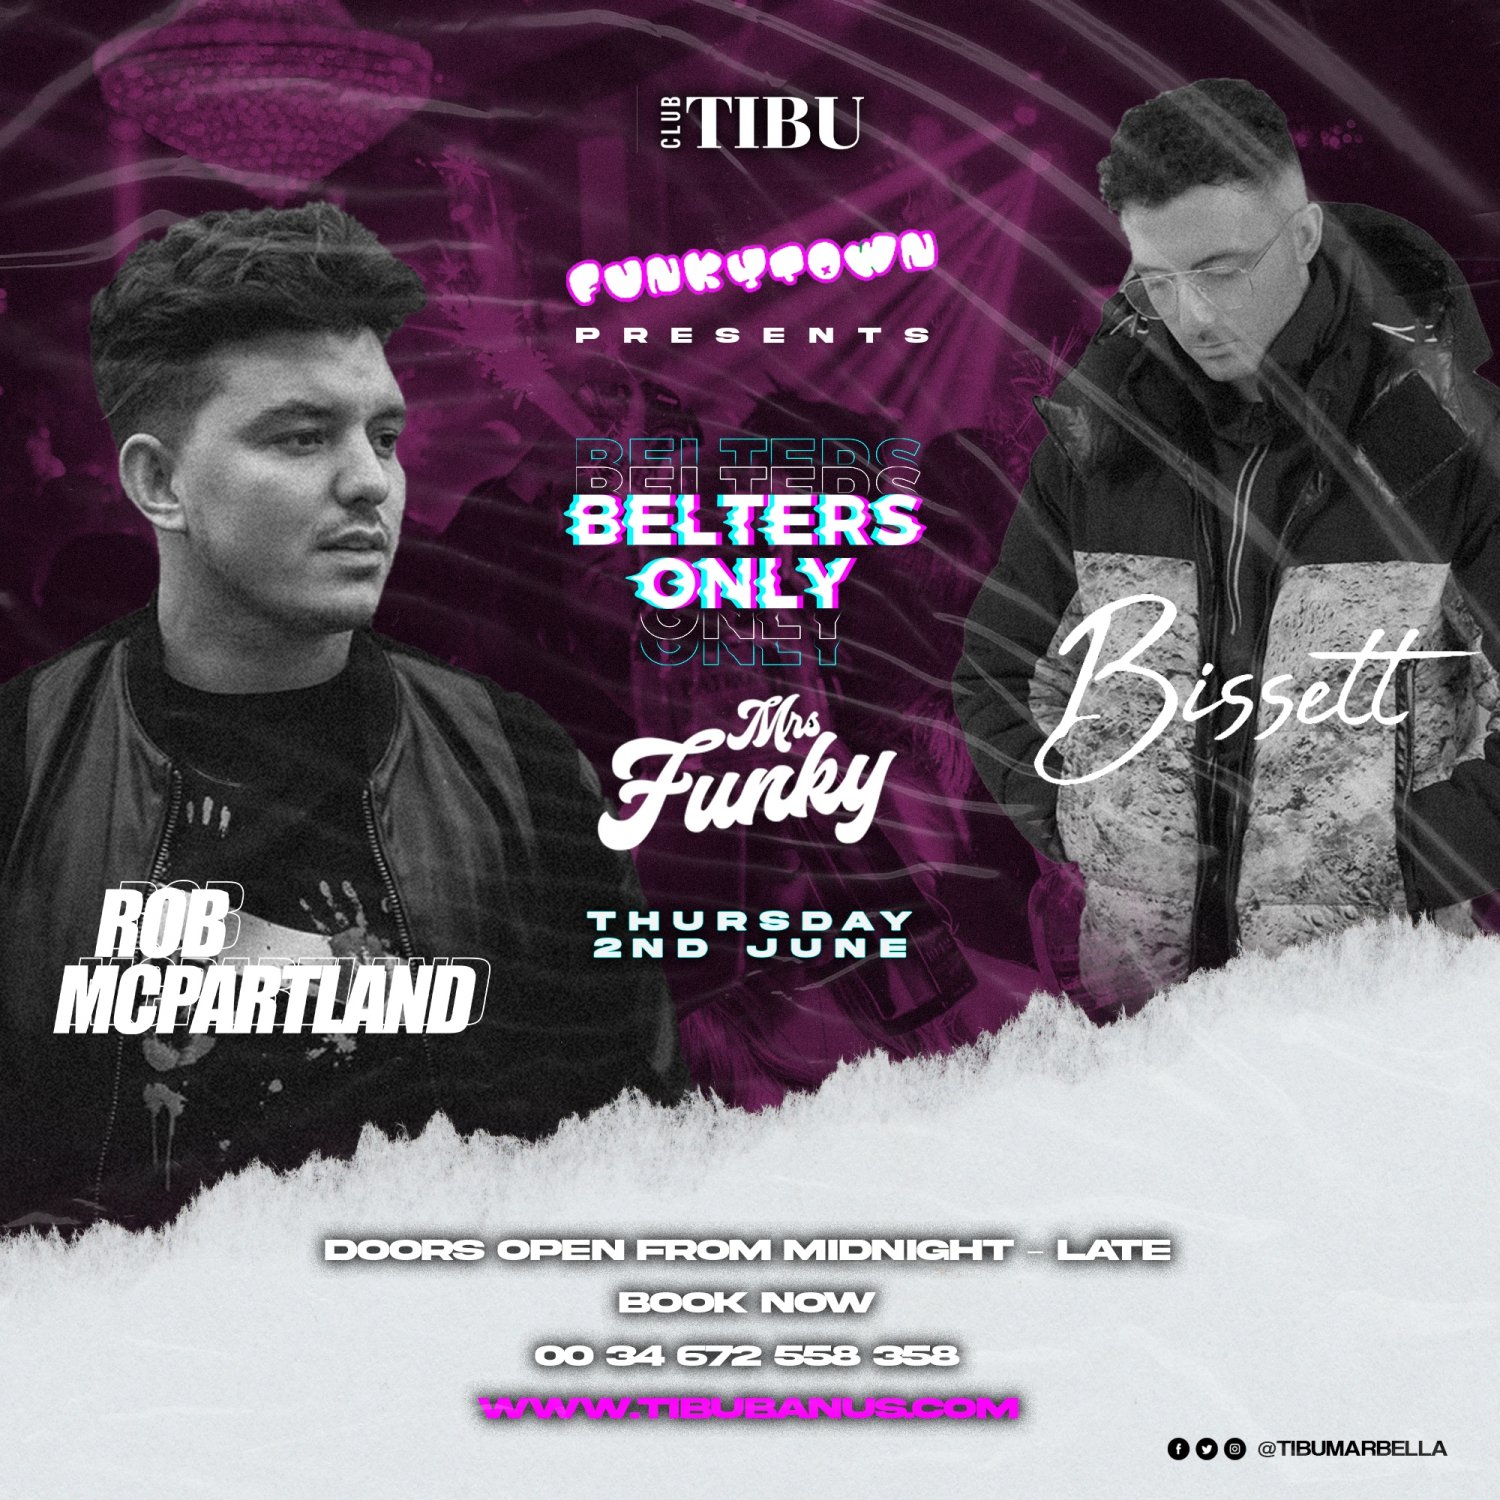 Funky Town presents Belters only at Tibu